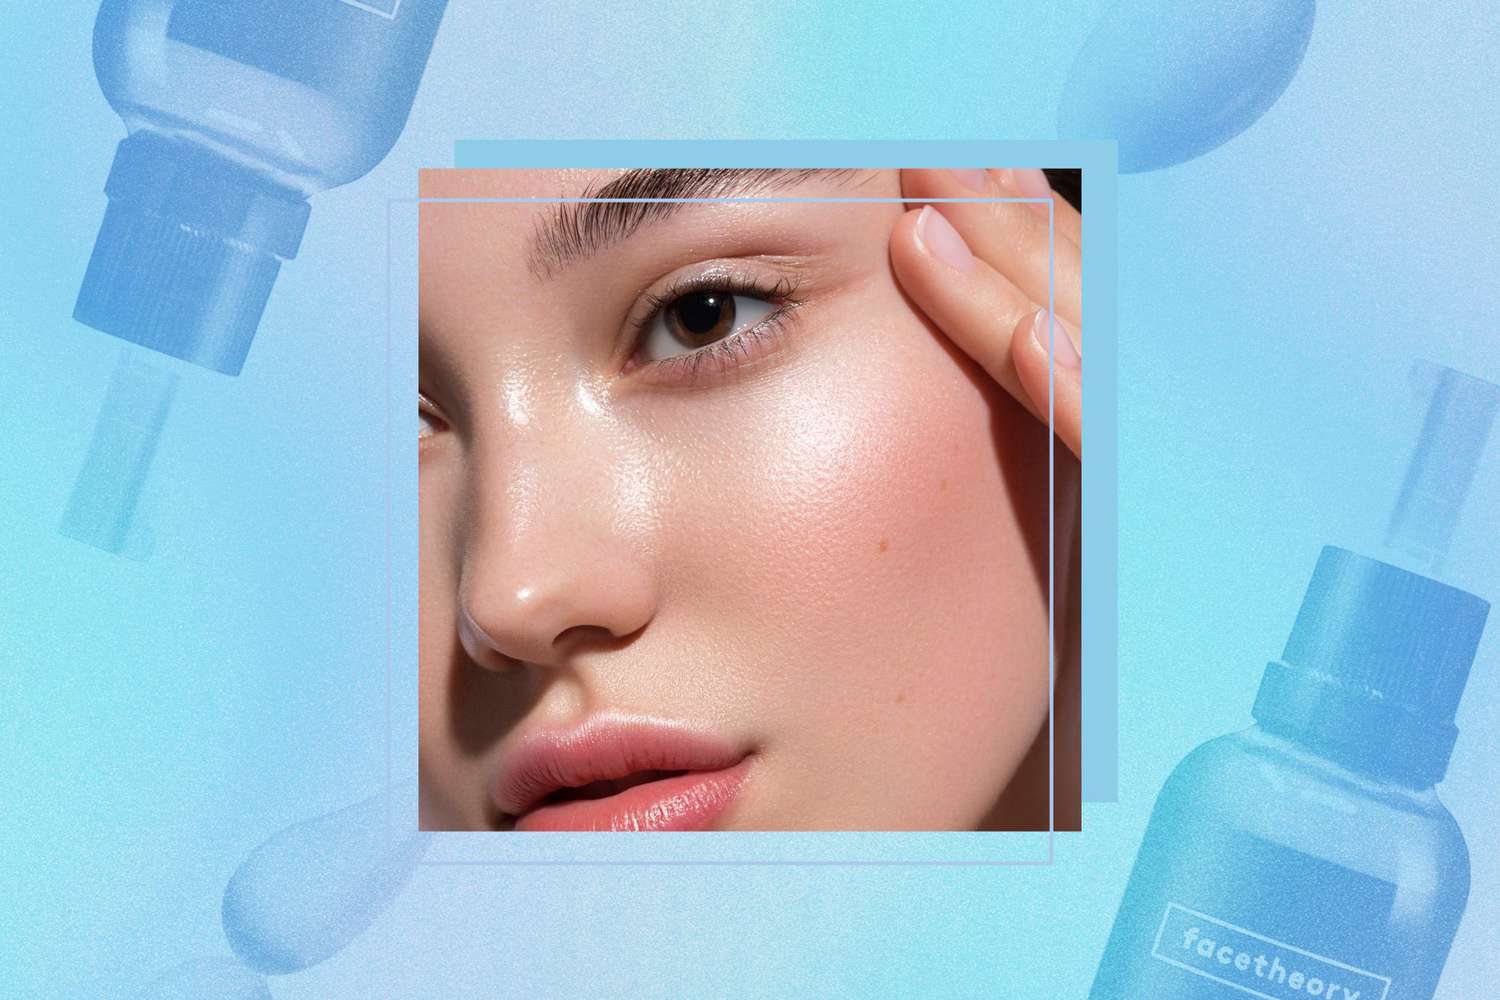 Reviewers-Say-This-Transformative-Retinol-Serum-Makes-Their-Skin-Look-Almost-Airbrushed-After-2-Weeks-GettyImages-1272479912